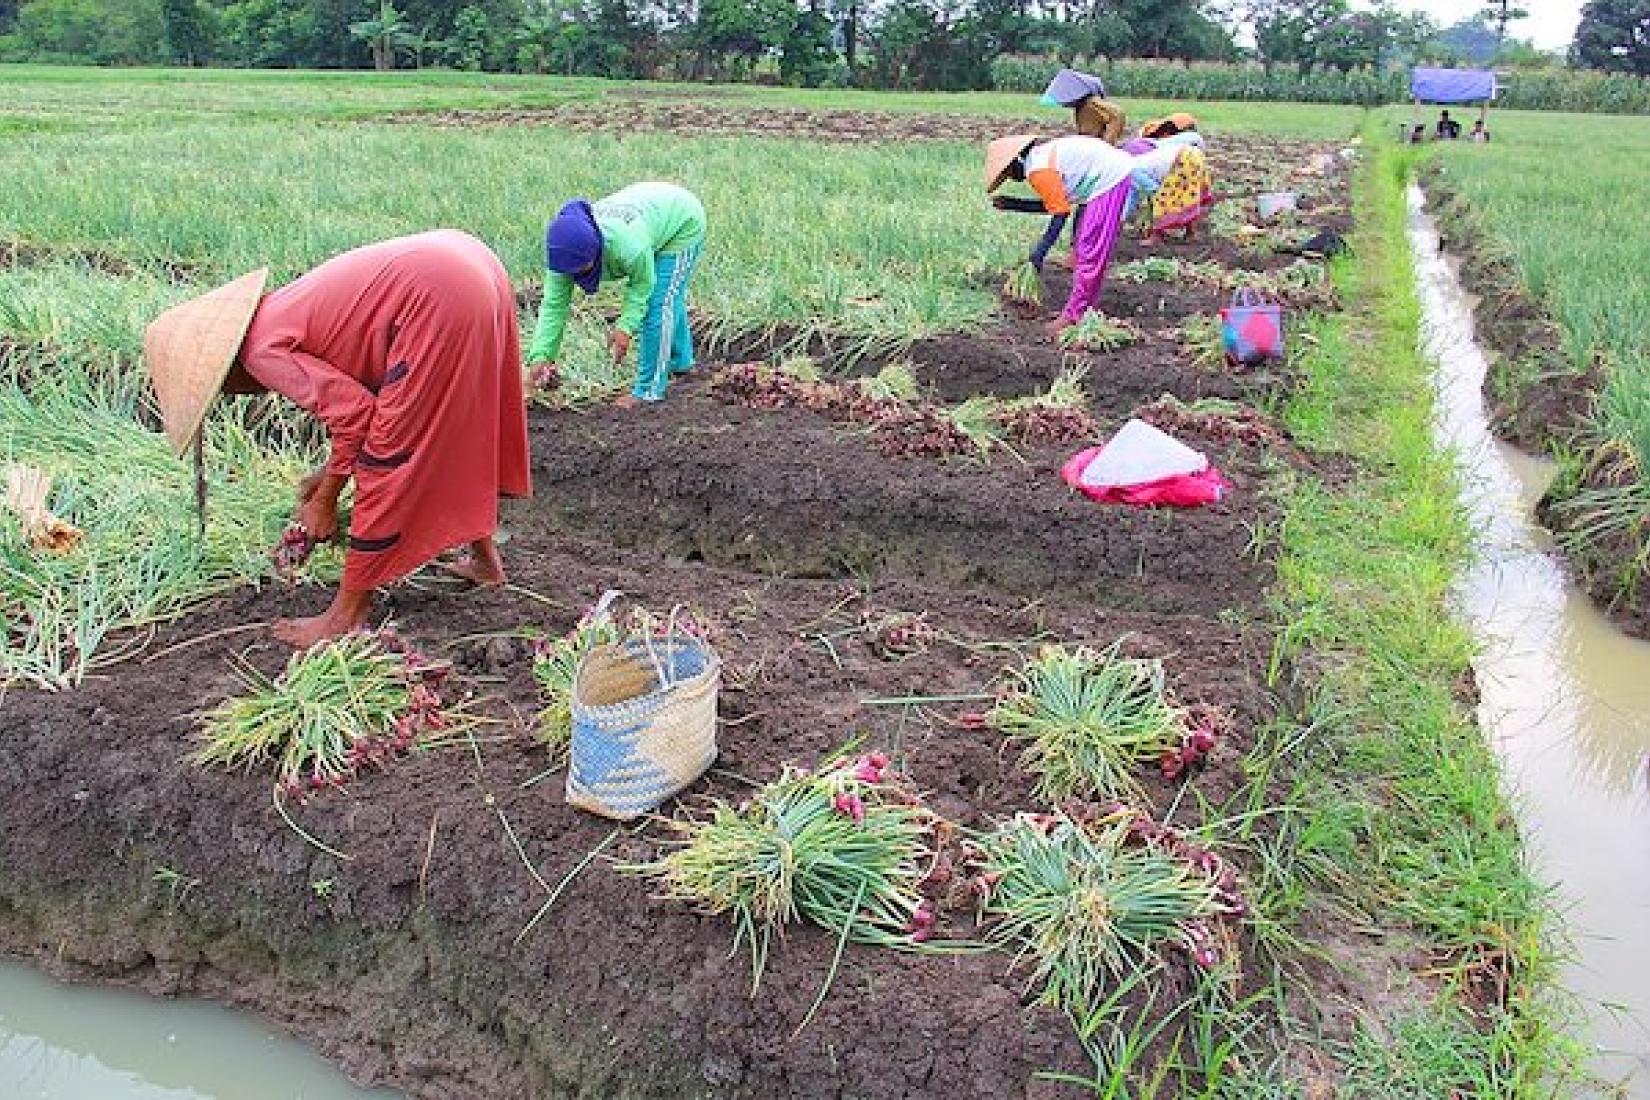 A group of female labourers in Sitanggal village of Larangan district, Brebes region is harvesting shallots. These are daily paid labourers who are hired by a shallot plantation owner. During peak harvest time, these female labourers can work long hours e